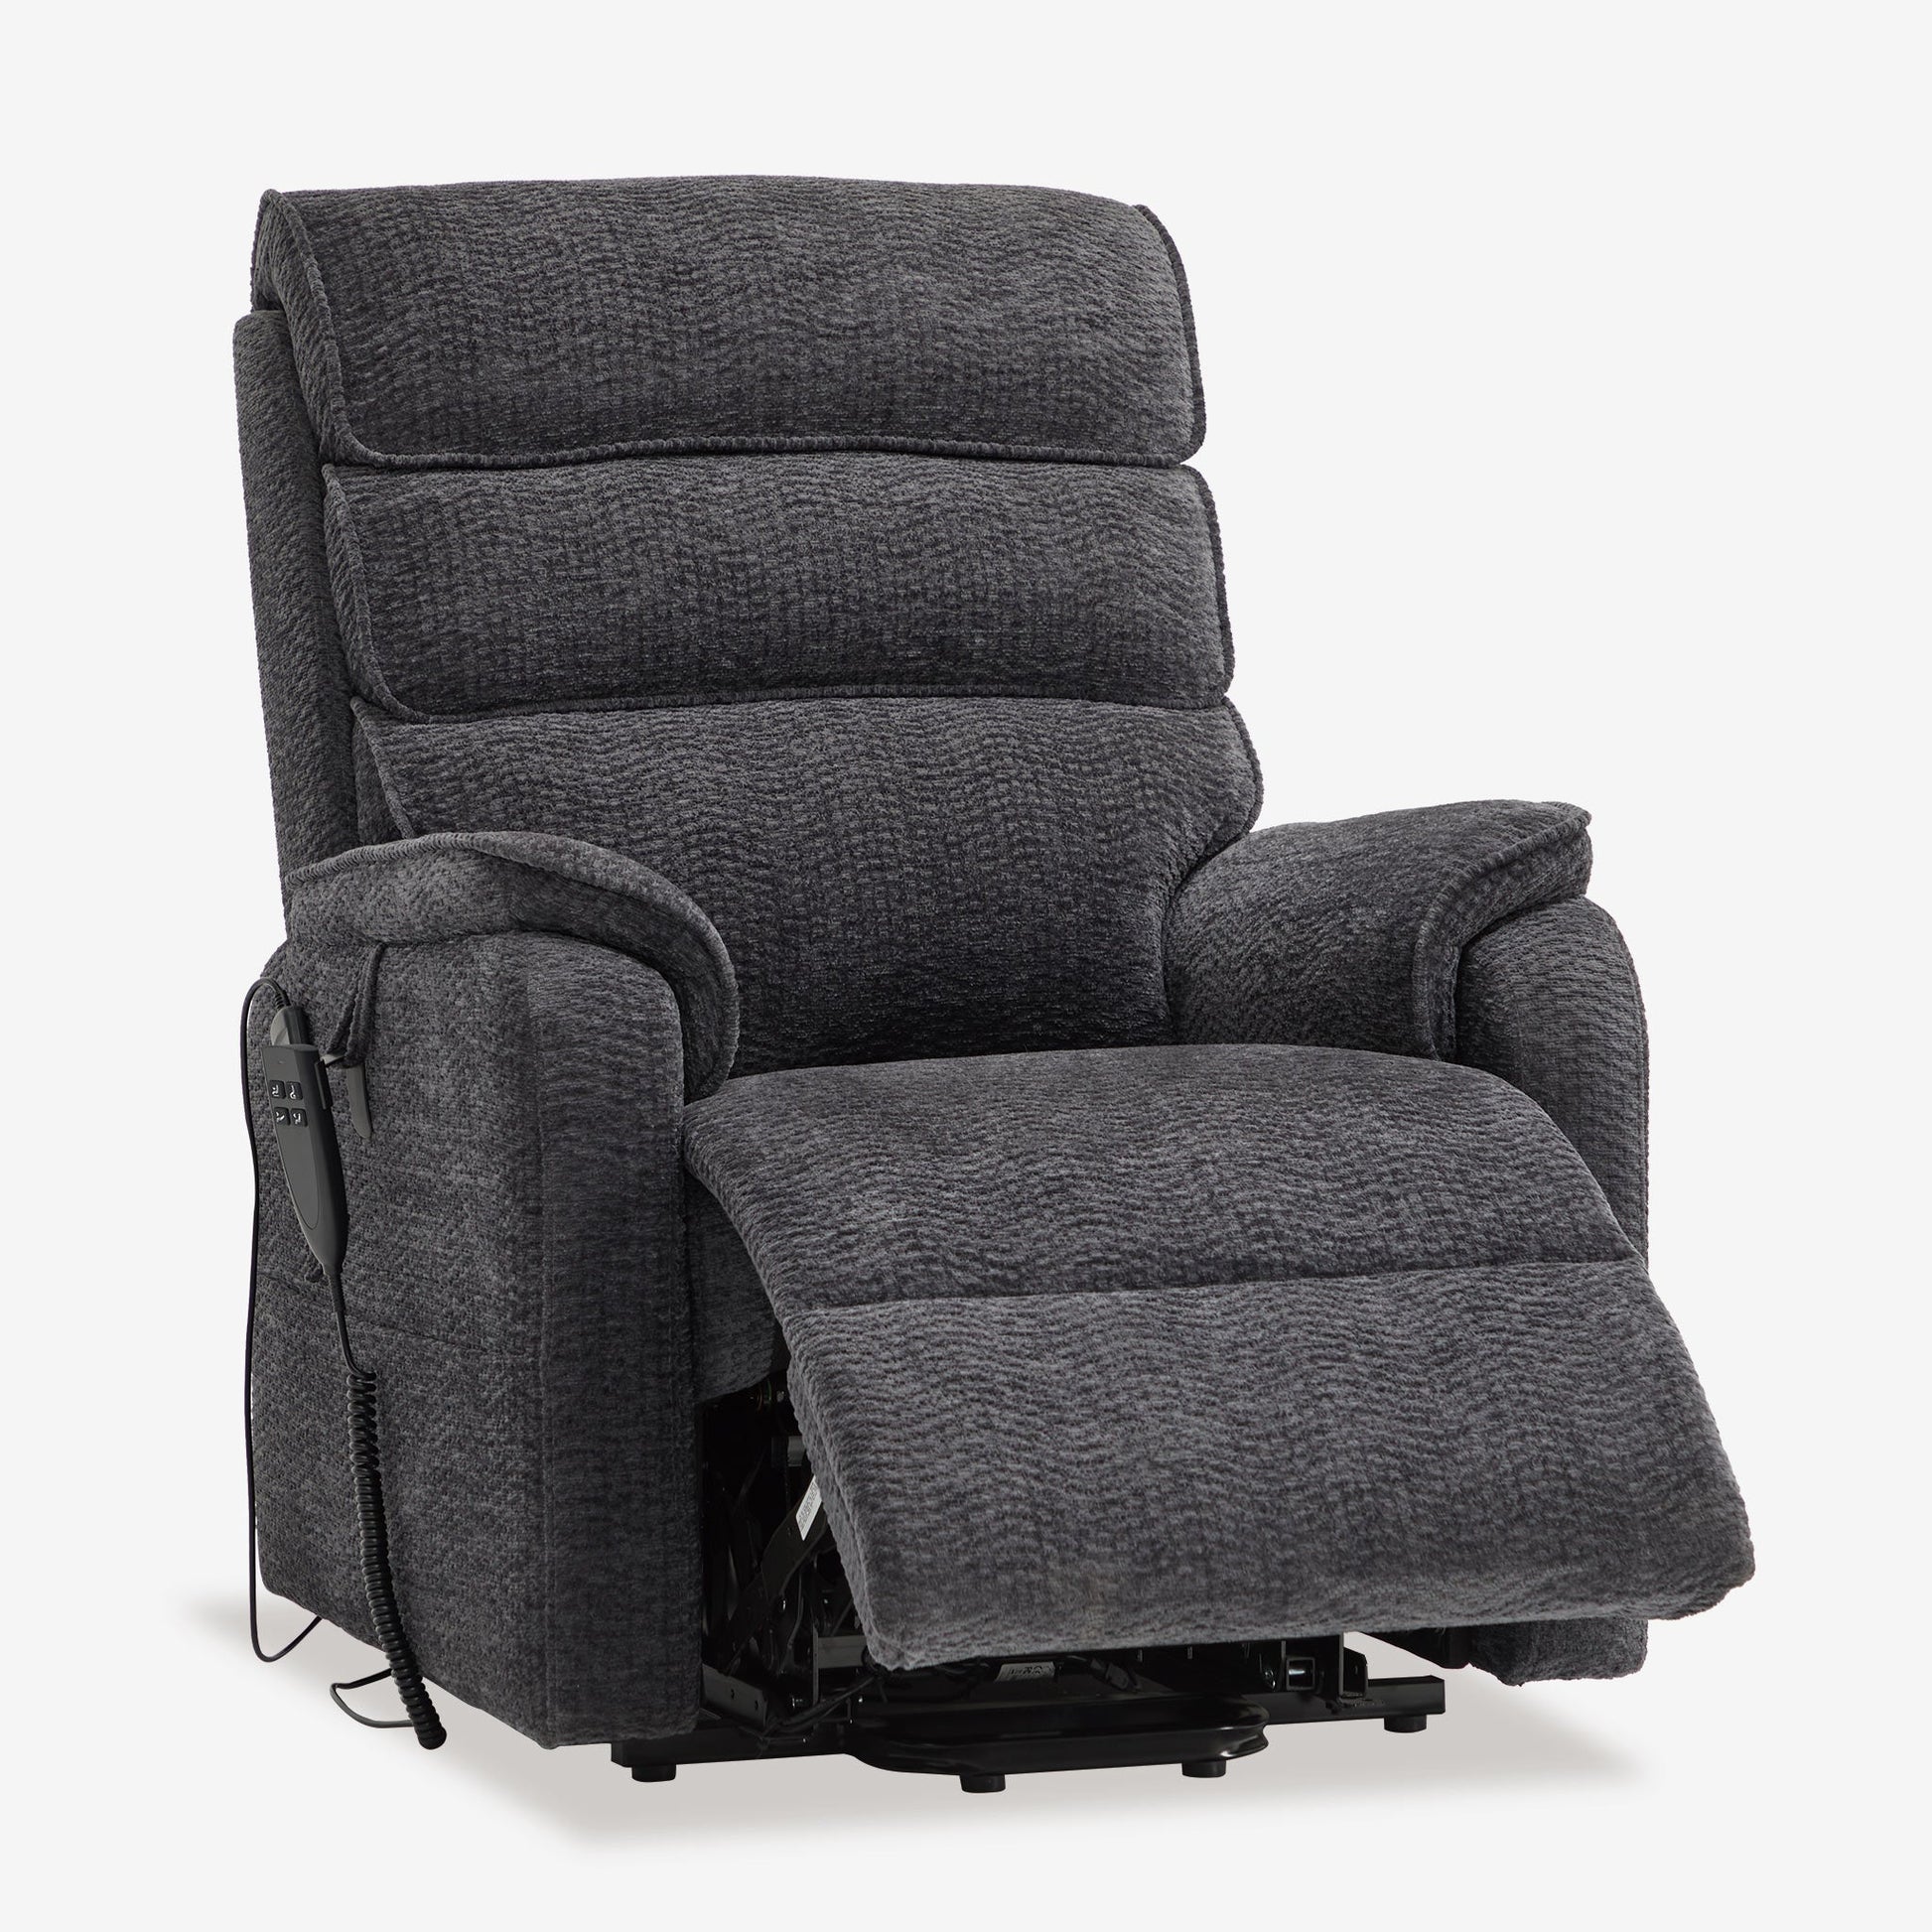 Best Power Lift Recliner For Heavy Person With Heat Massage